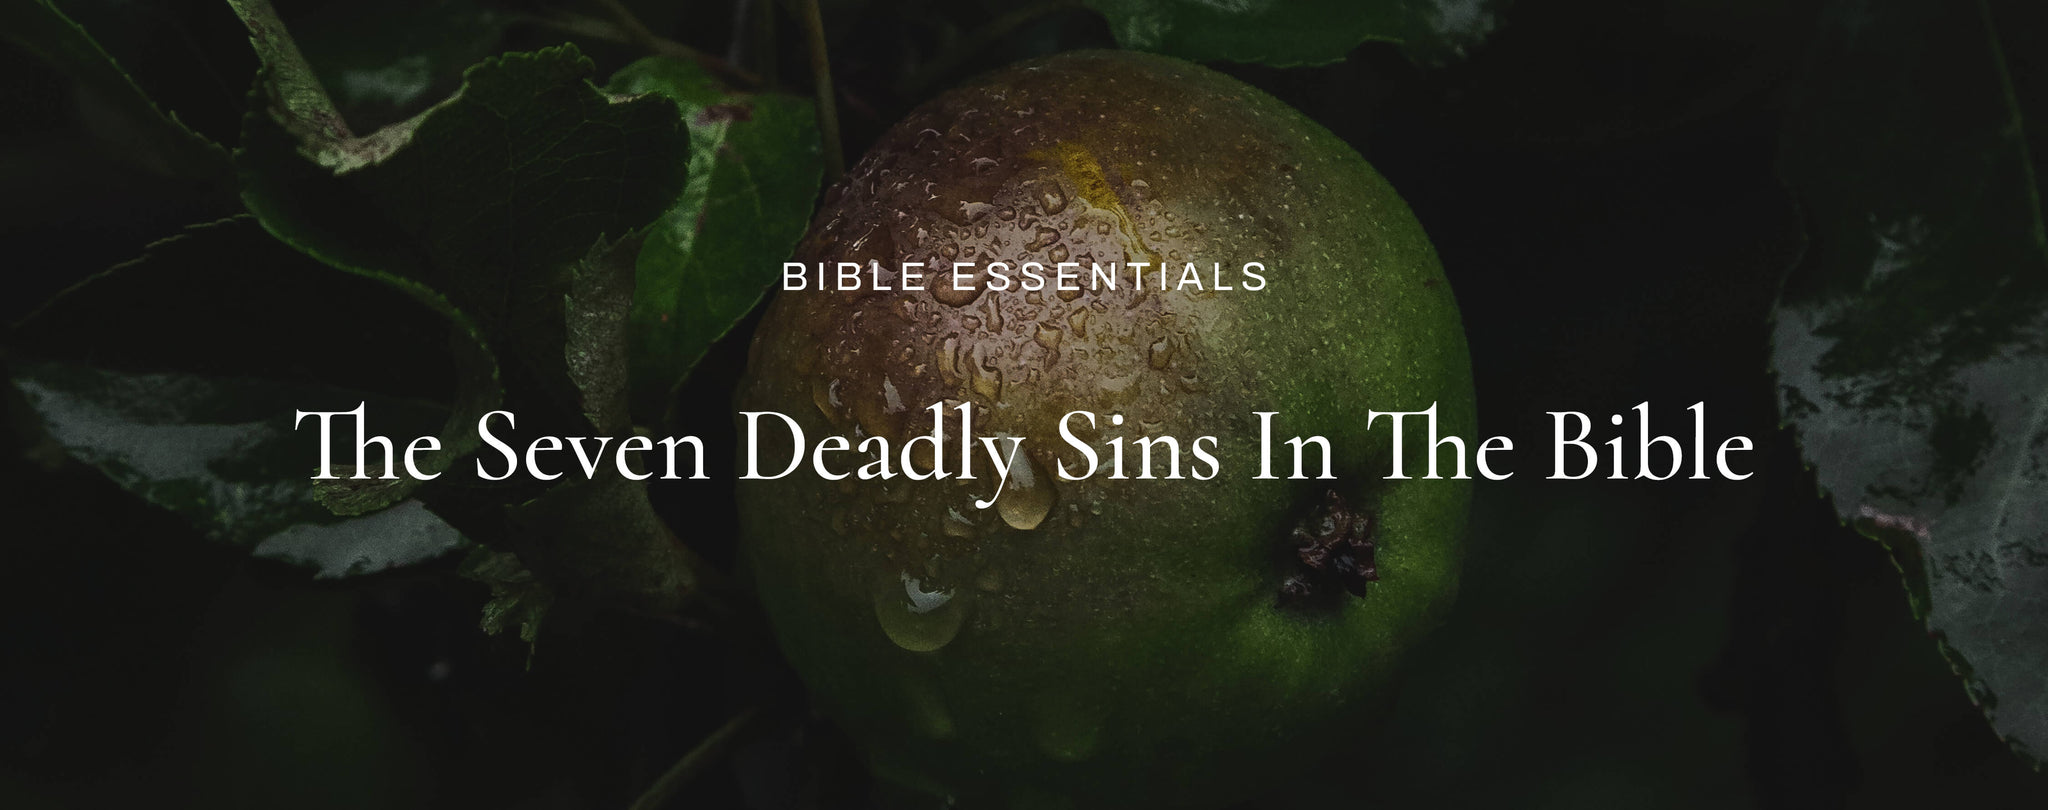 What Are The 7 Deadly Sins In The Bible?